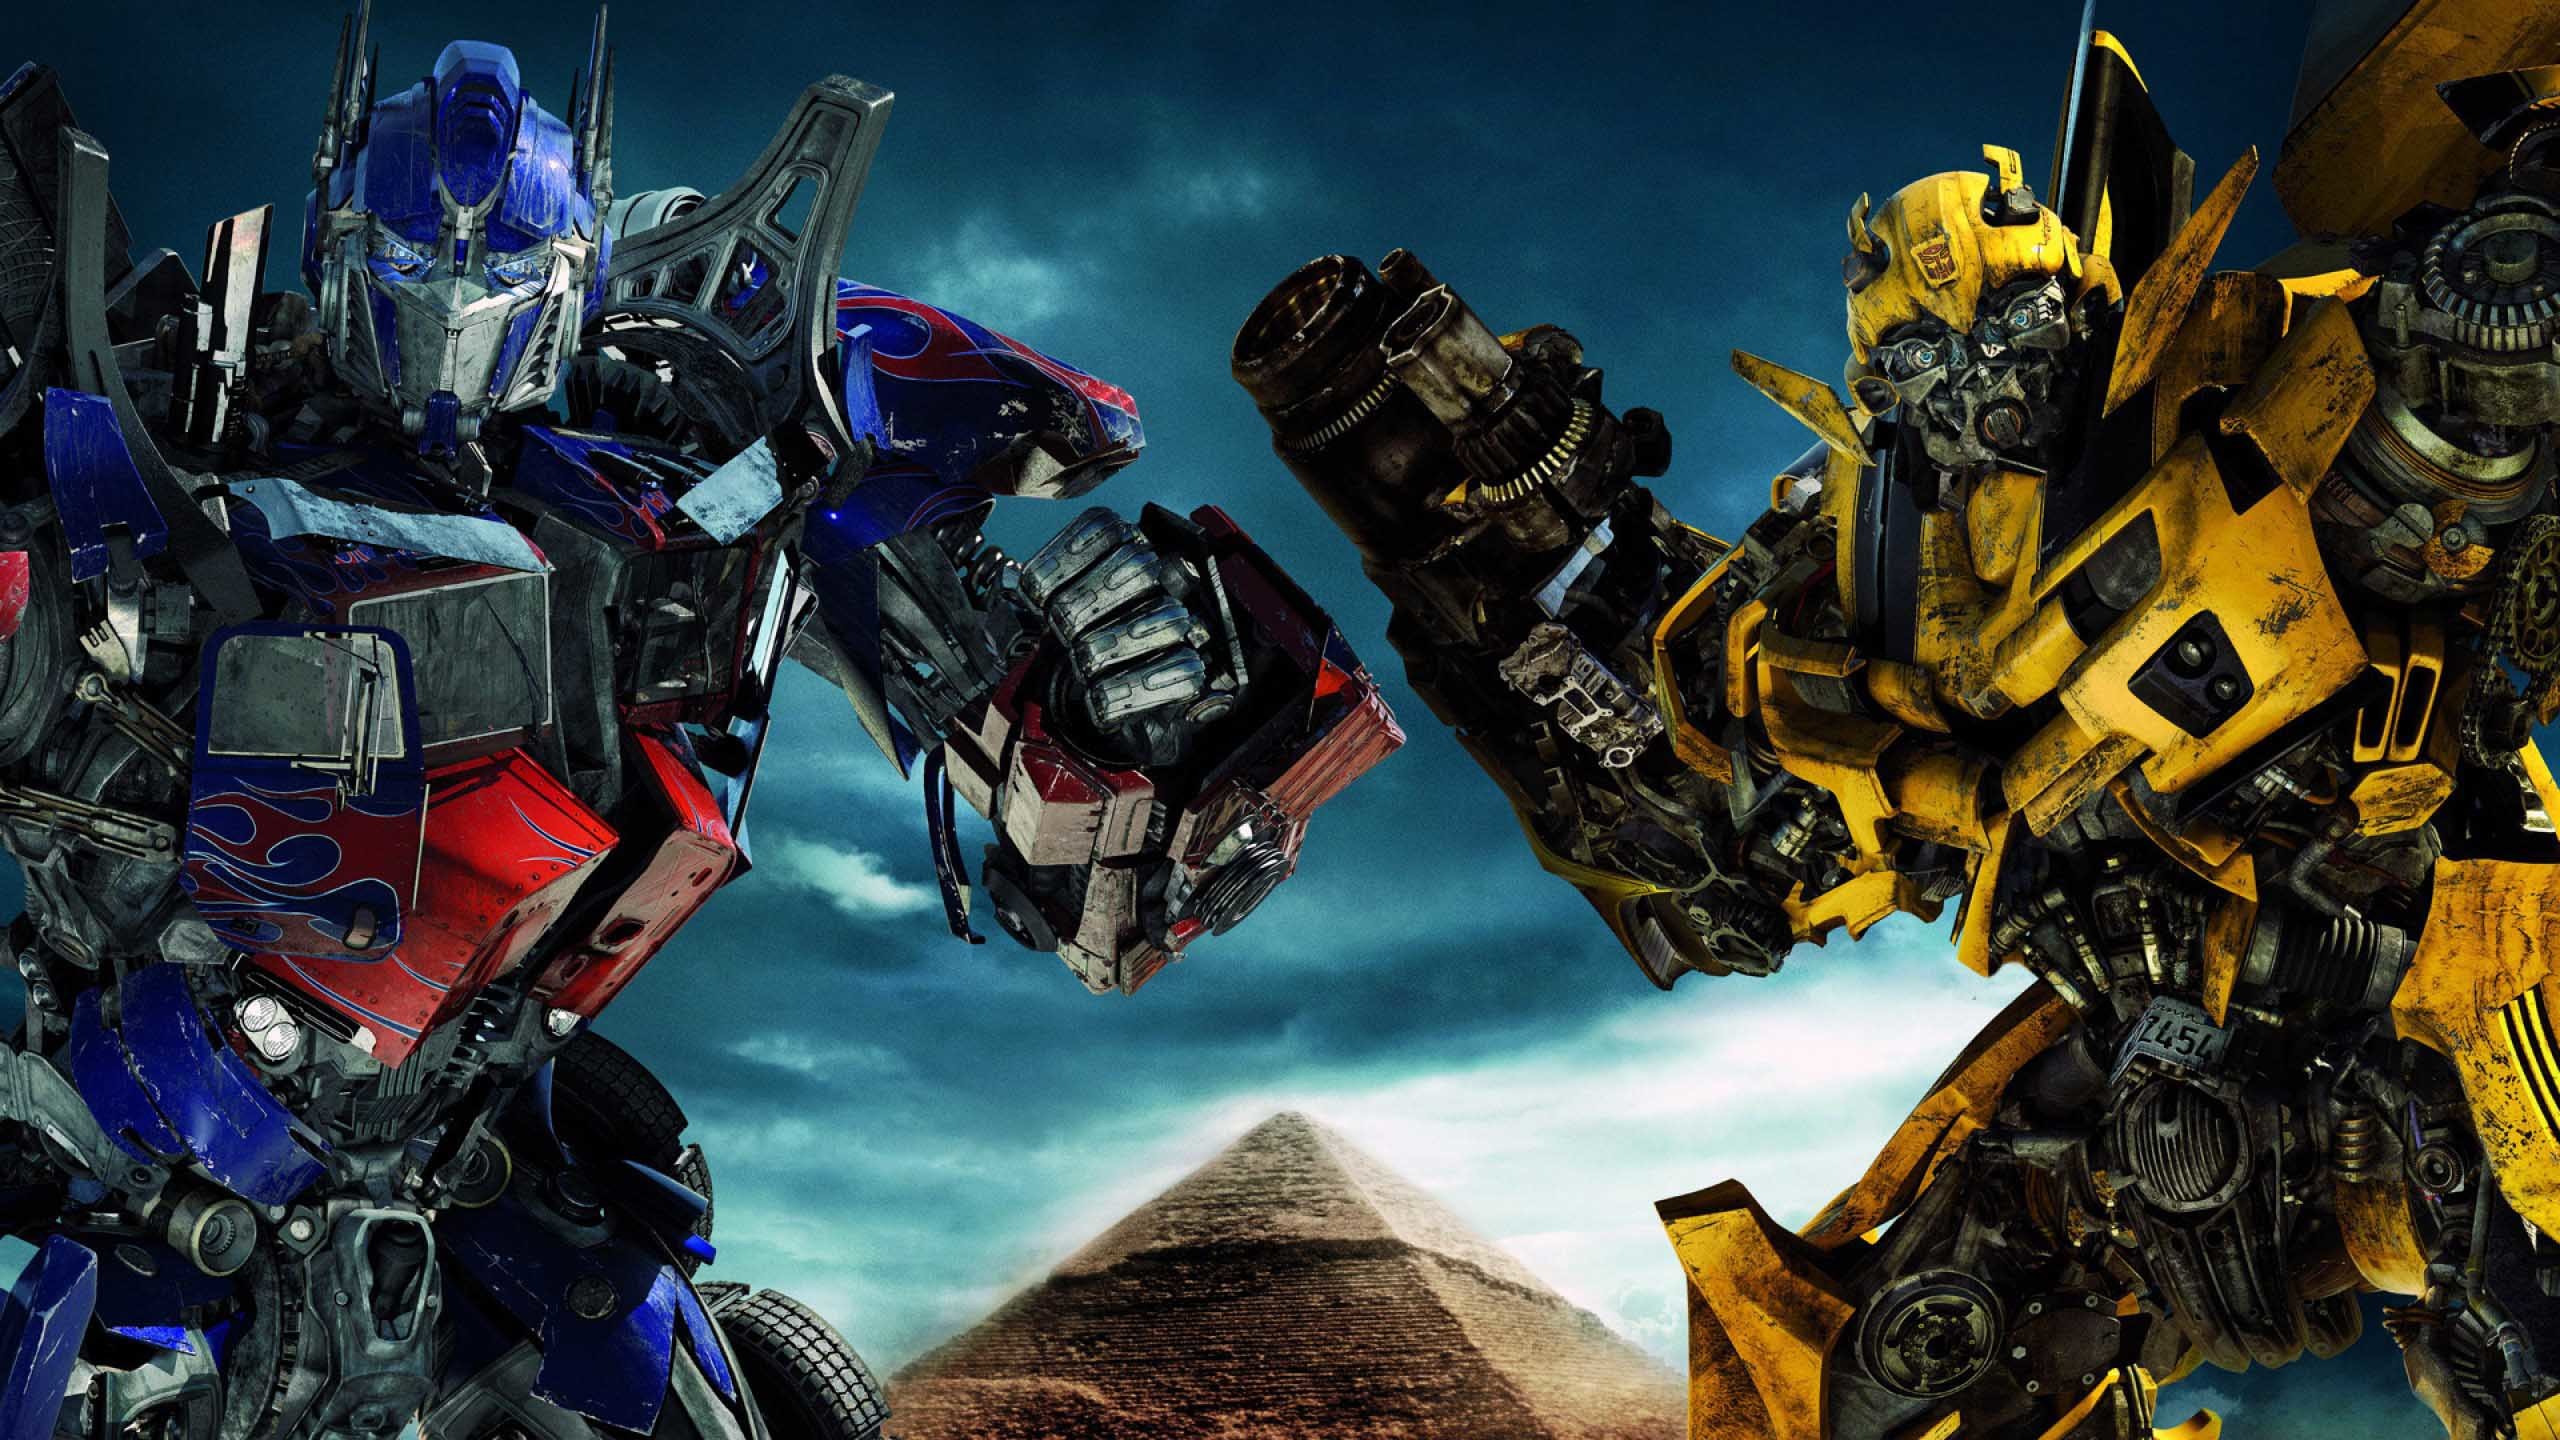 transformers 5 full movie free download